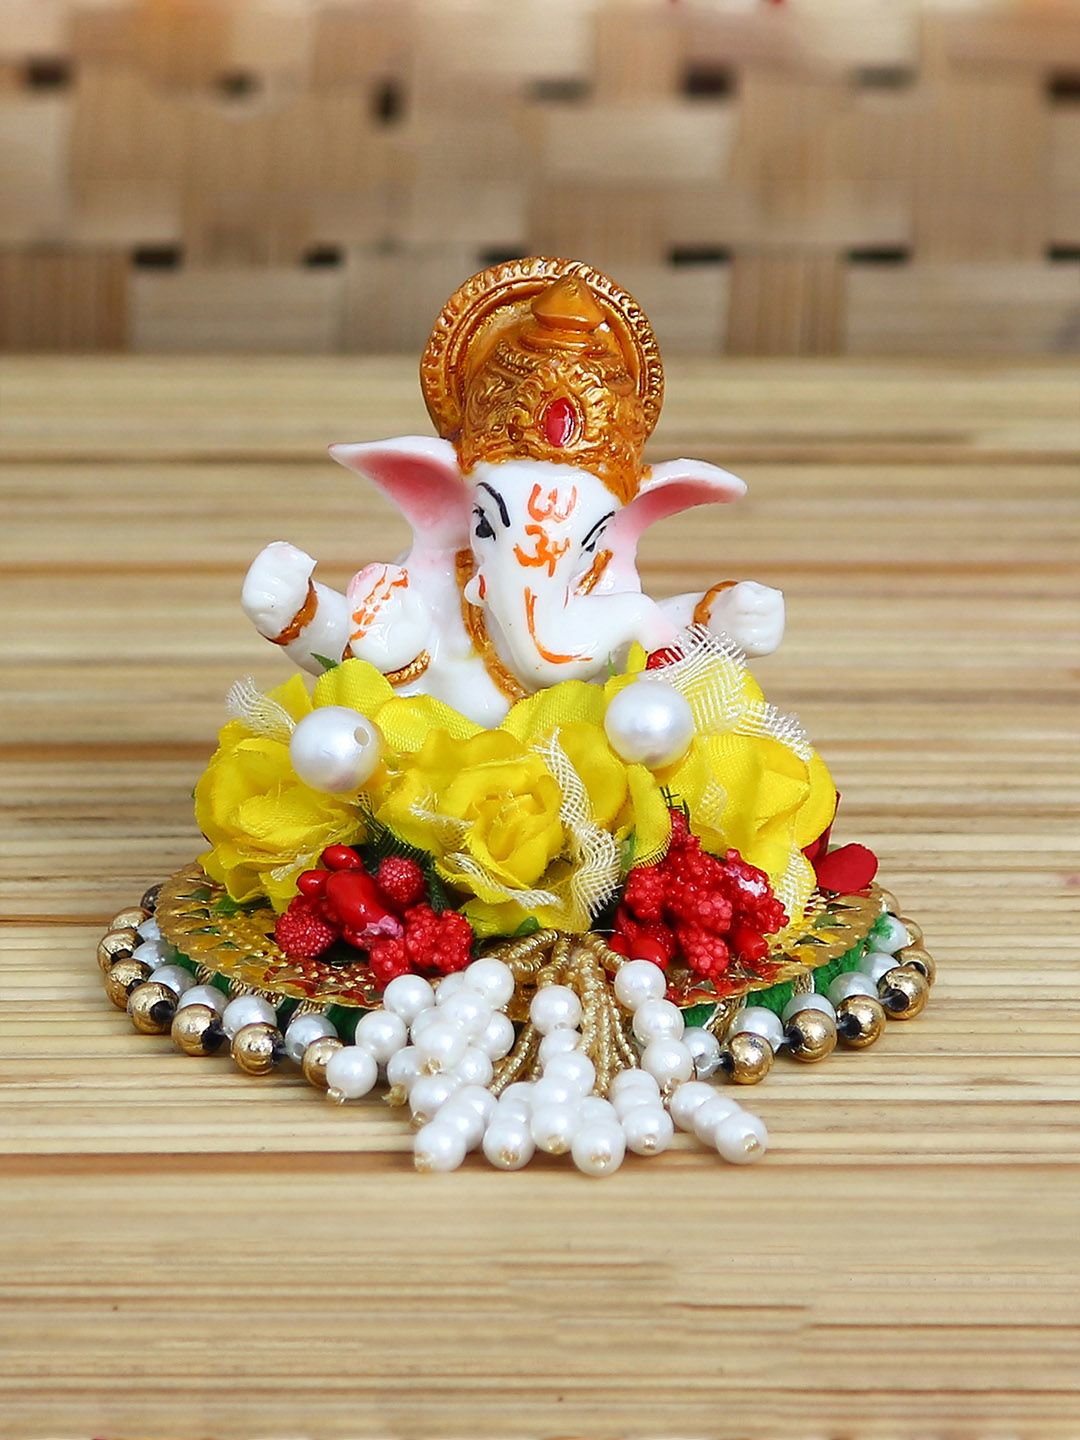 eCraftIndia White & Yellow Handcrafted Lord Ganesha On Decorative Plate With Flowers Price in India